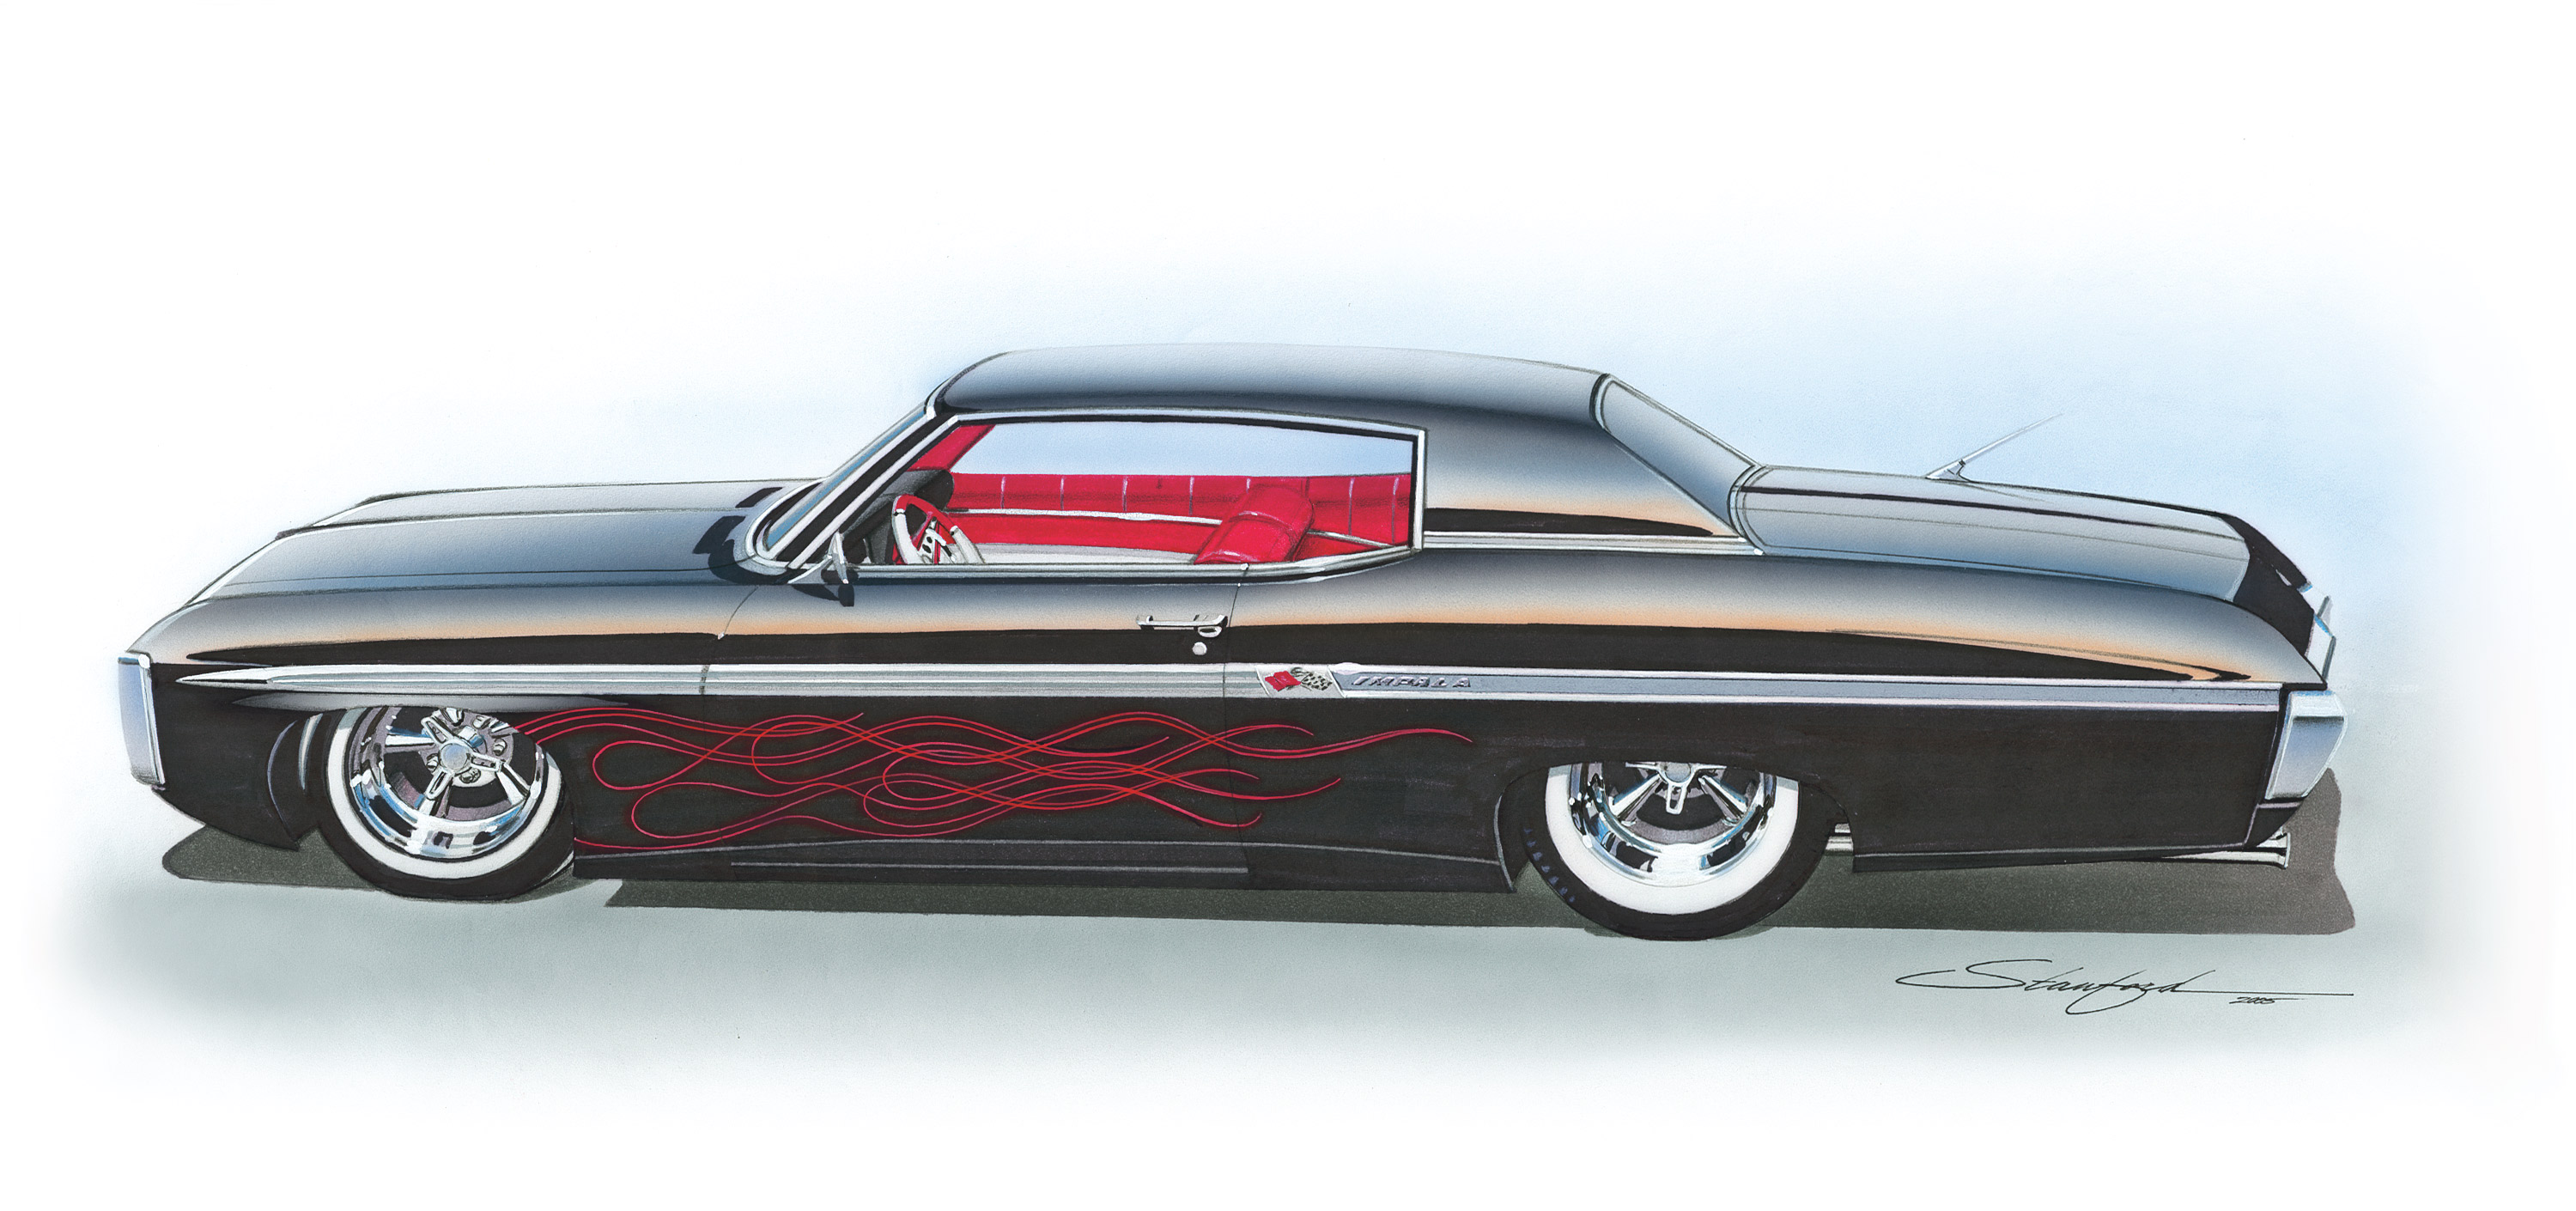 Chevy Hot Rod Impala Lowrider Classic Muscle Cars Wallpaper Background